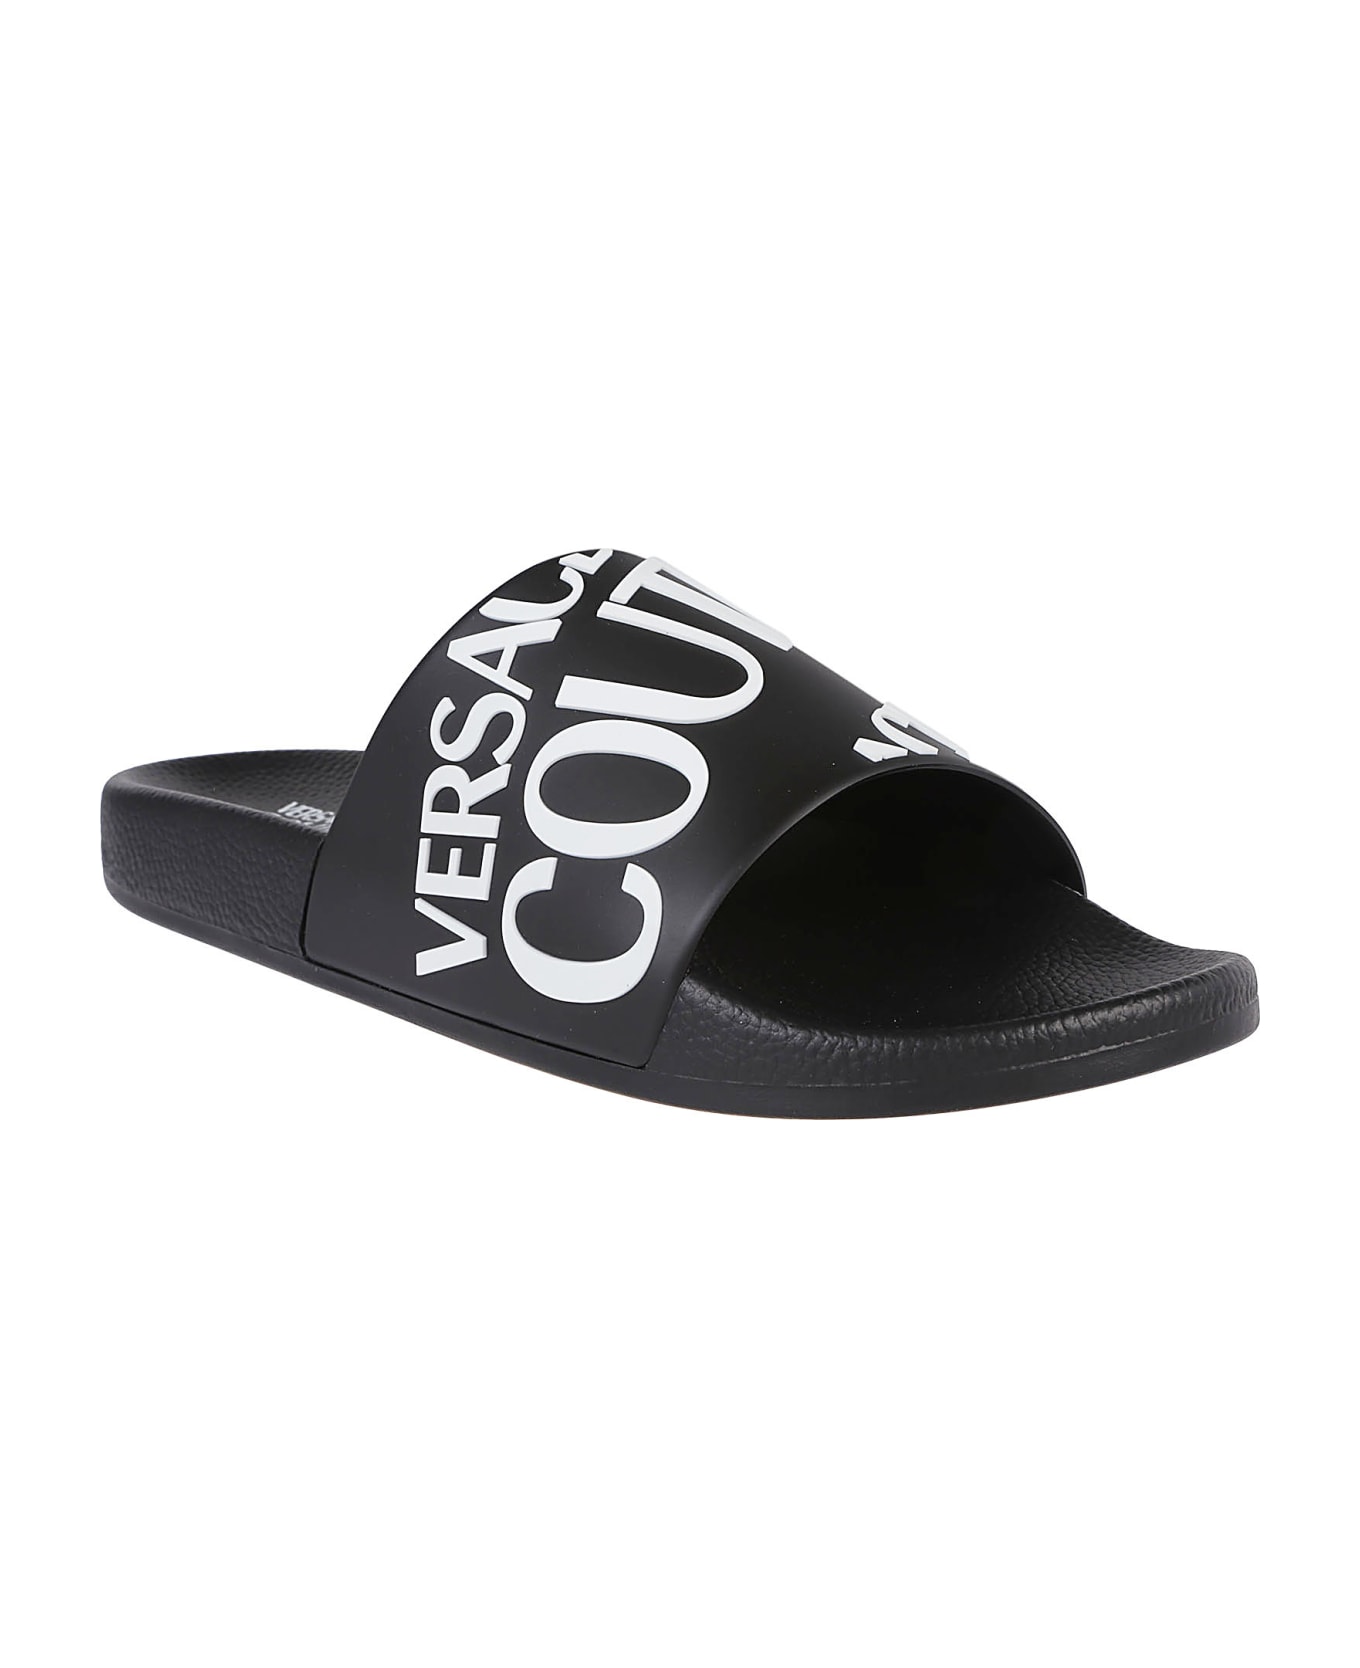 Versace Jeans Couture Gummy Sq1 Sliders - Black その他各種シューズ